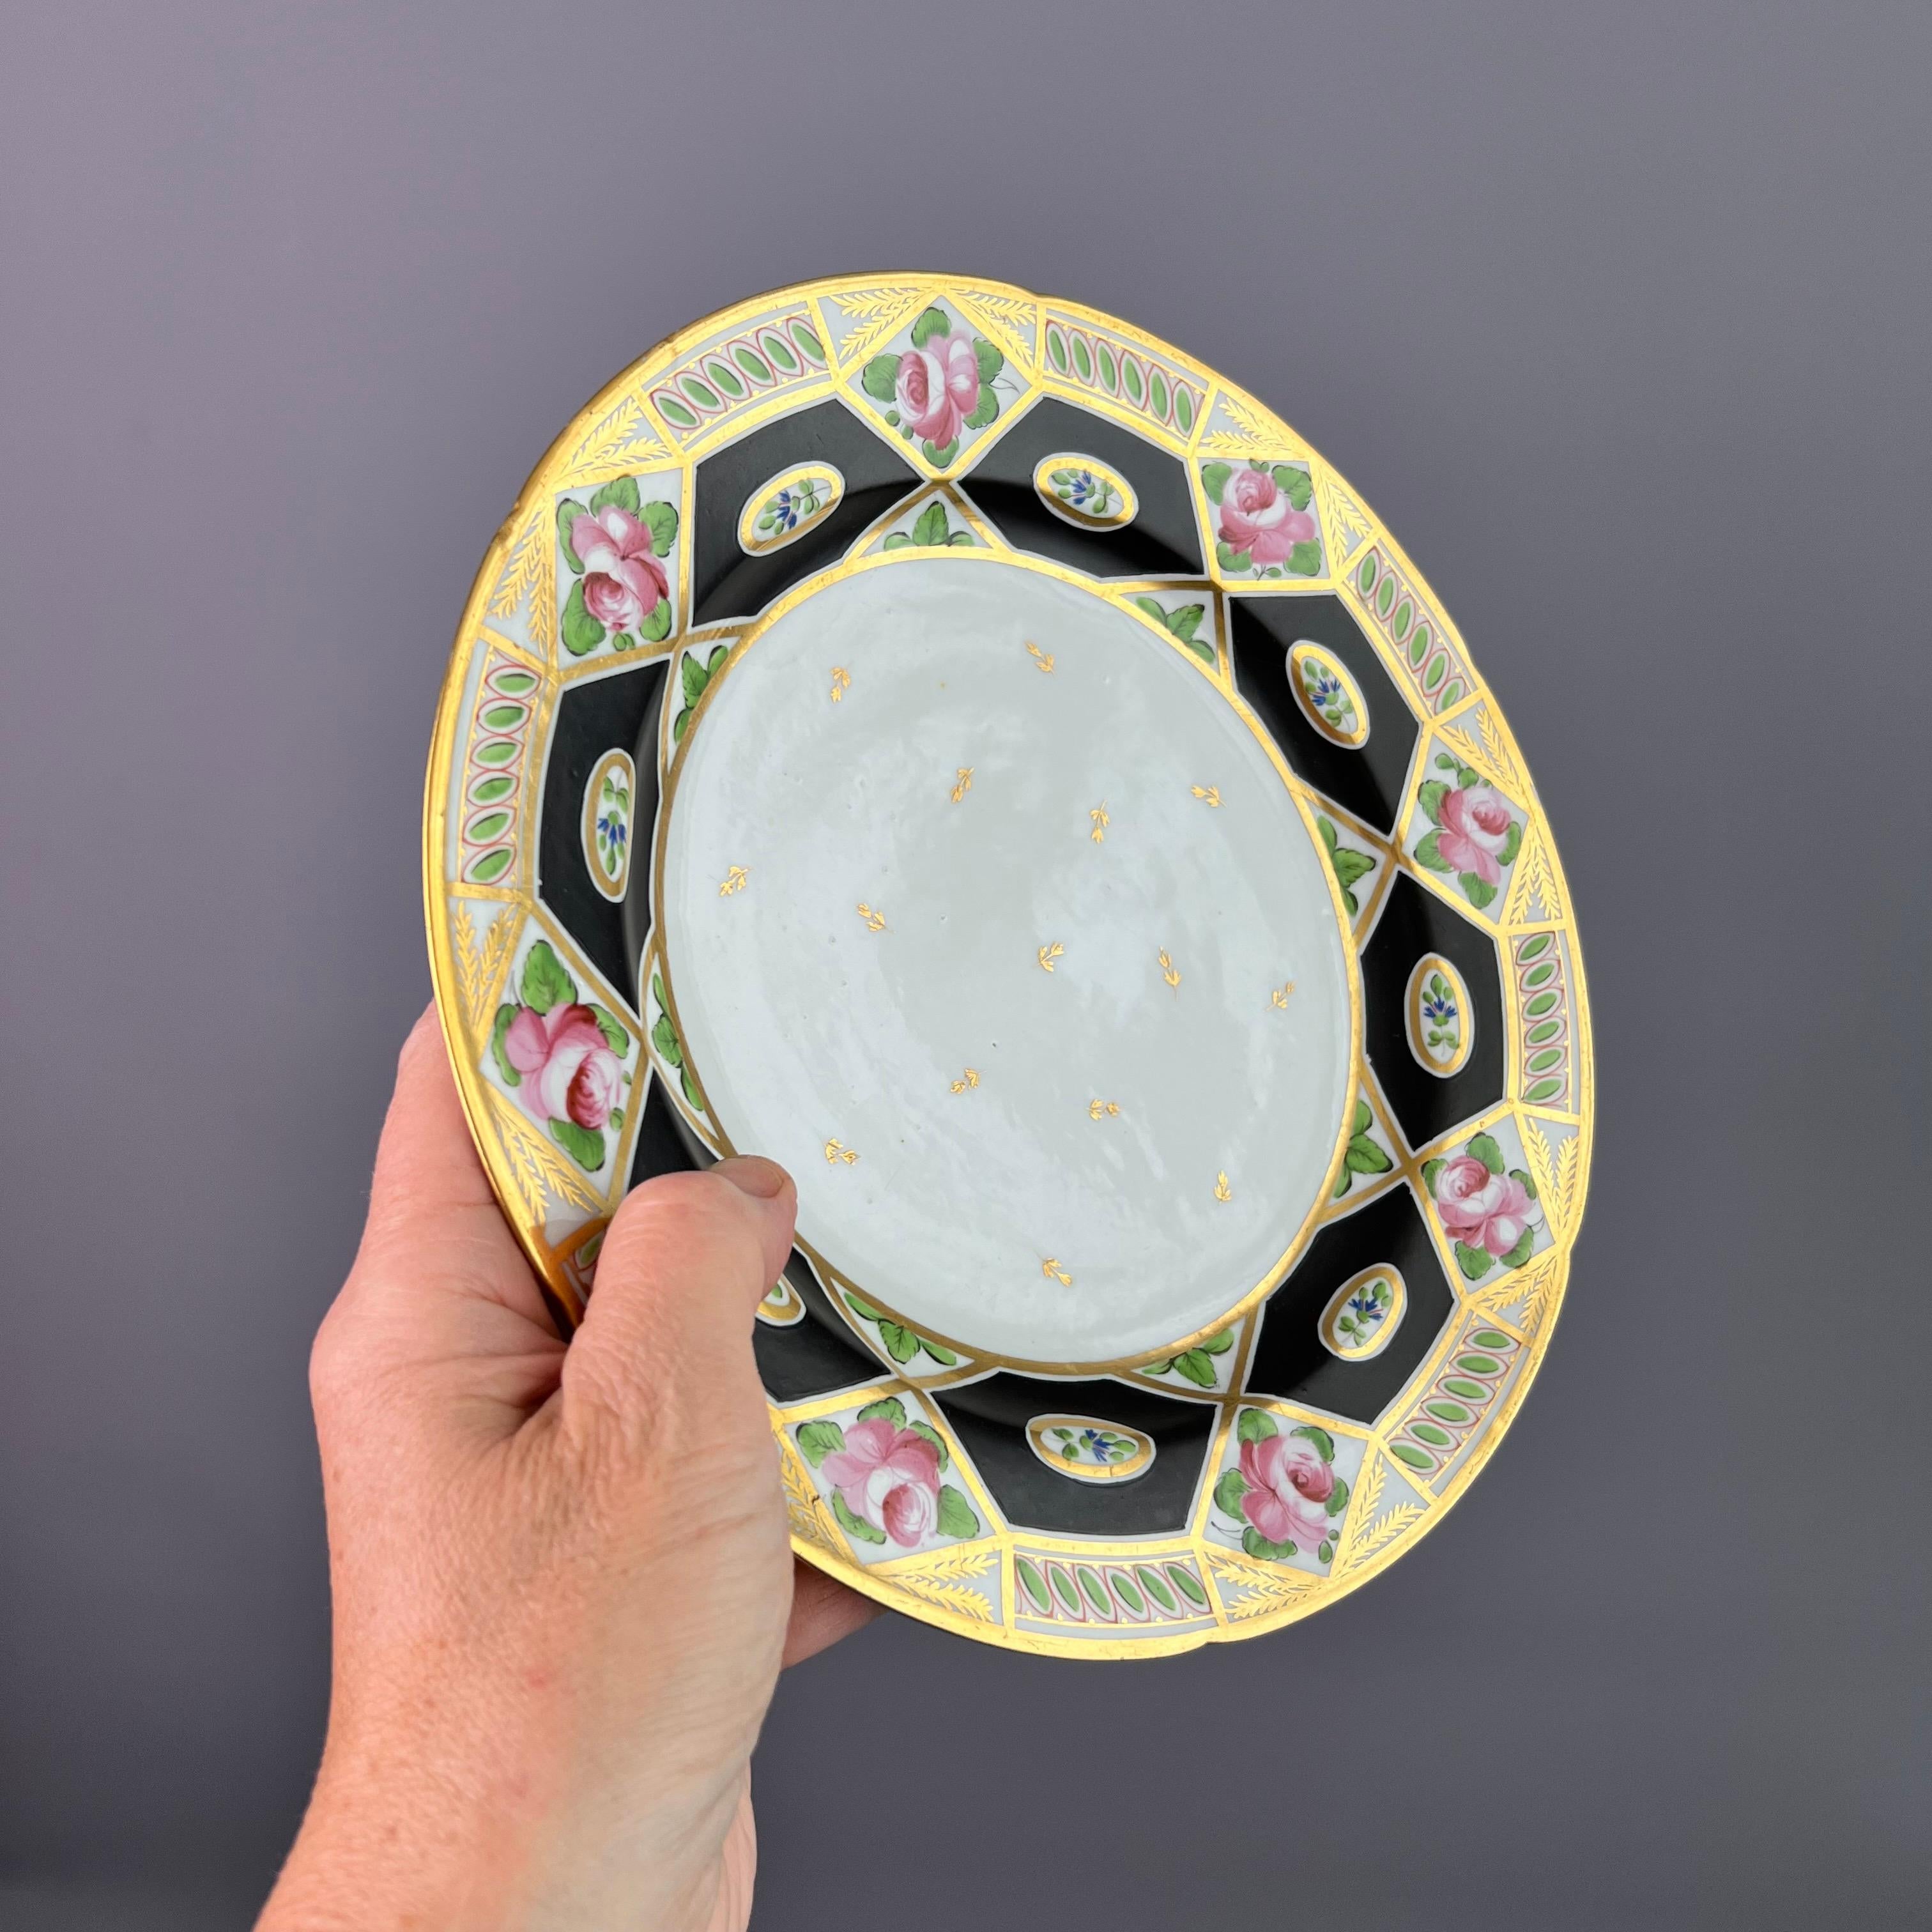 This is a beautiful dessert plate made by Coalport in about 1815. It is decorated in the famous 